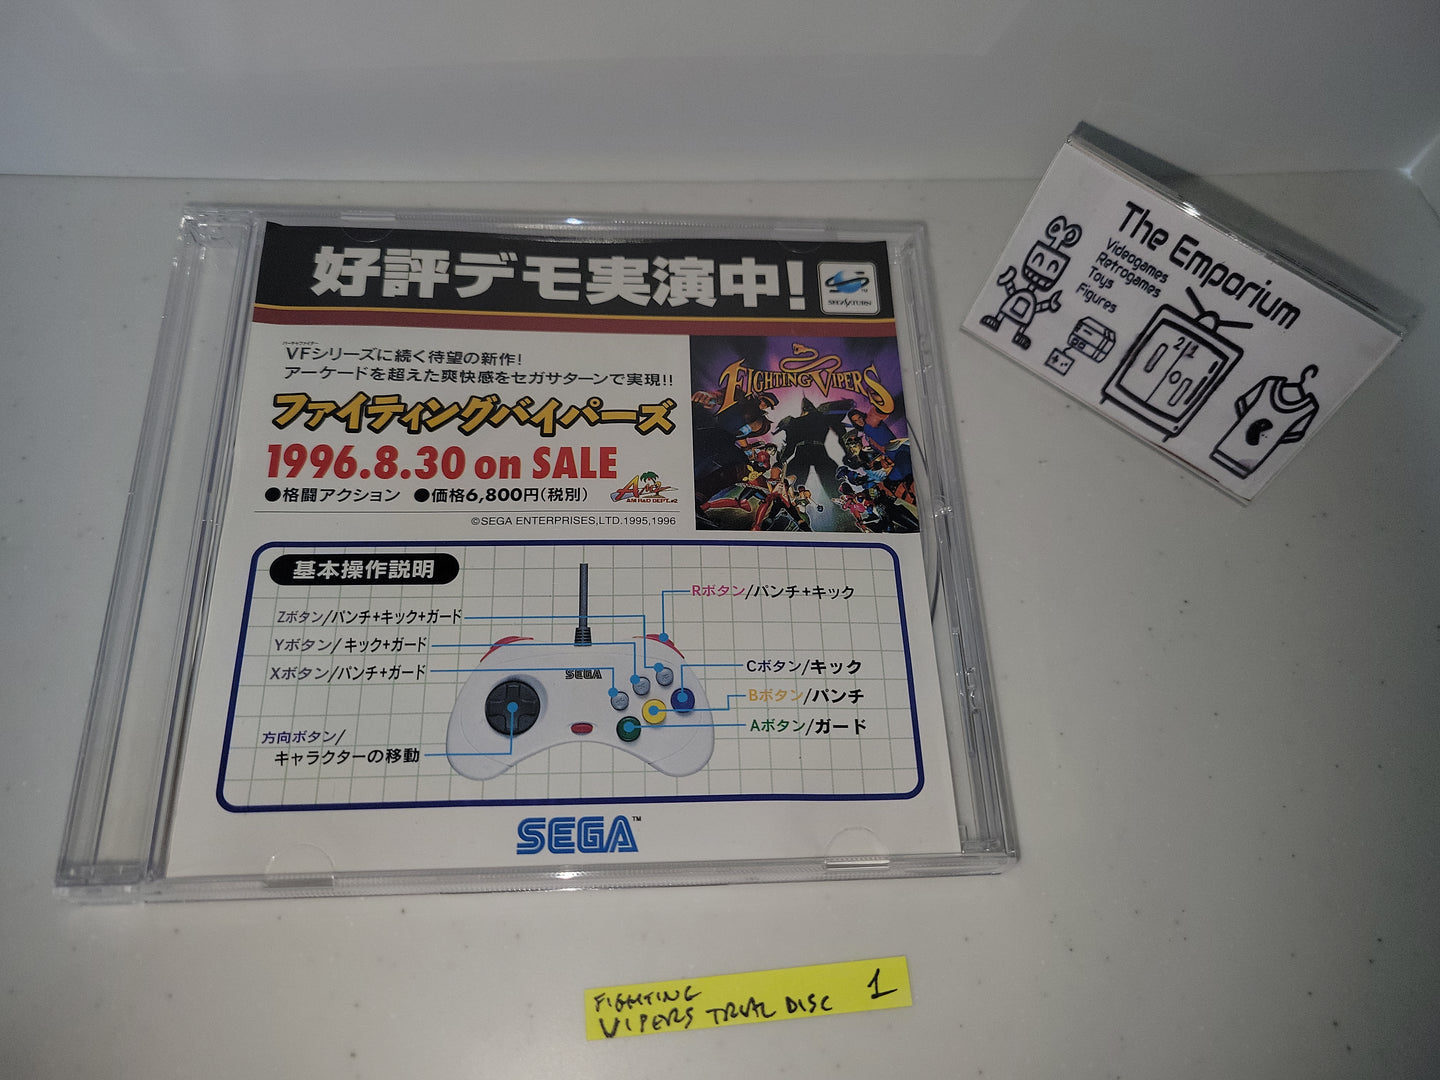 Fighting Vipers Trial Disc Not for Sale - Sega Saturn sat stn